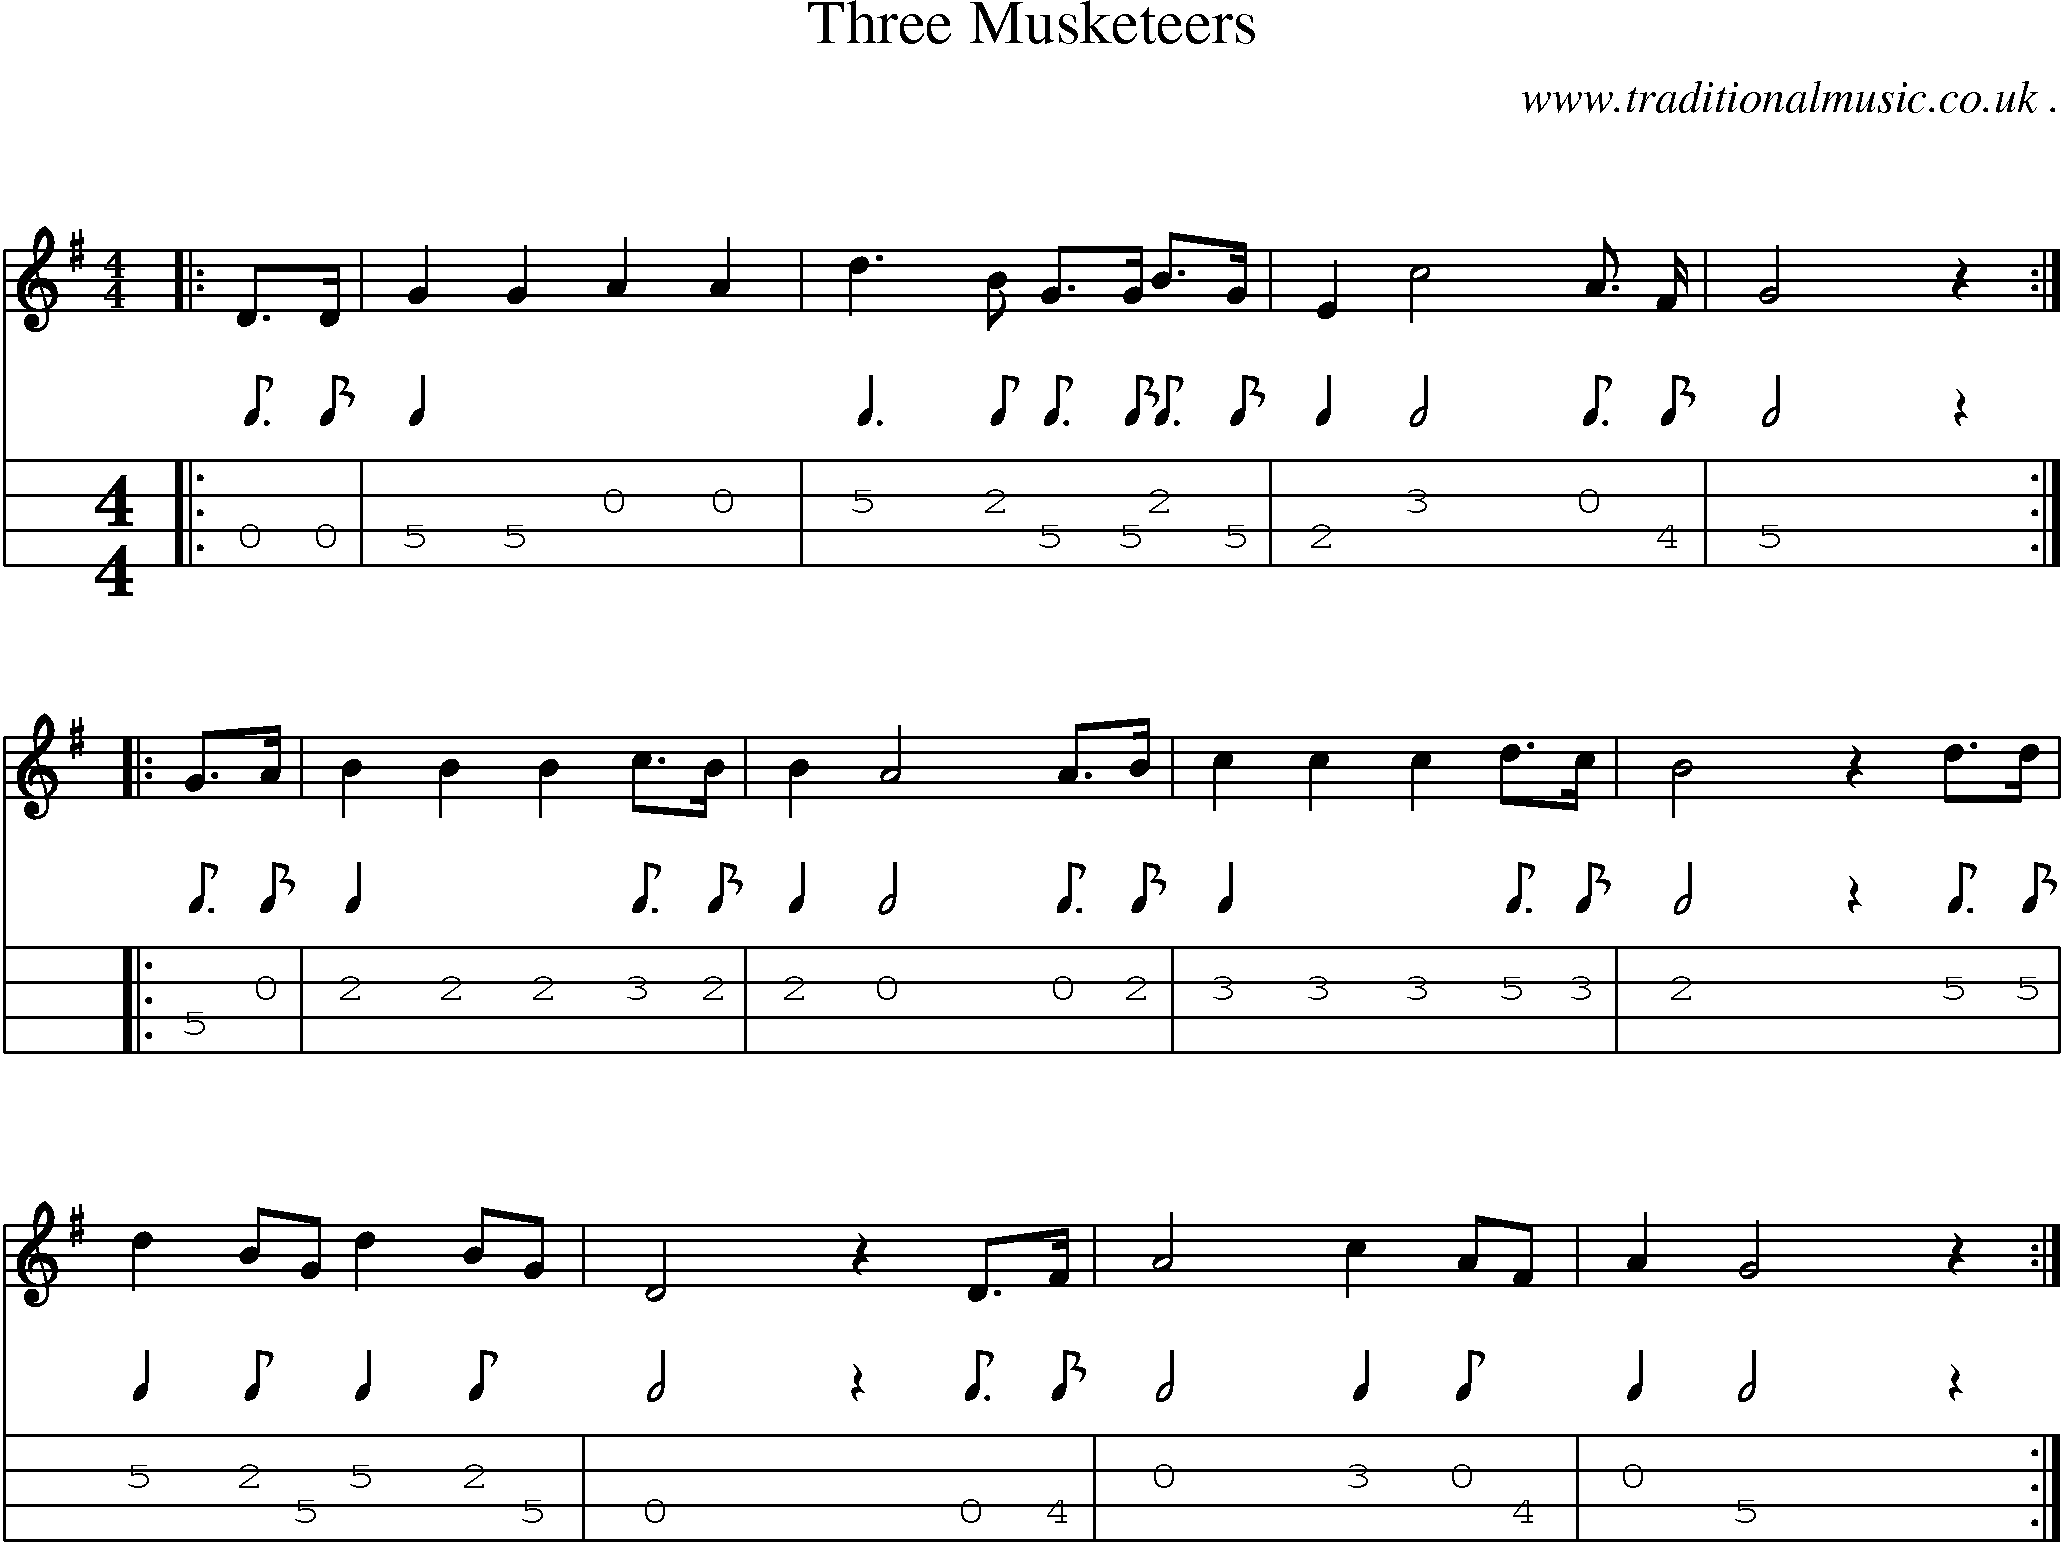 Sheet-Music and Mandolin Tabs for Three Musketeers